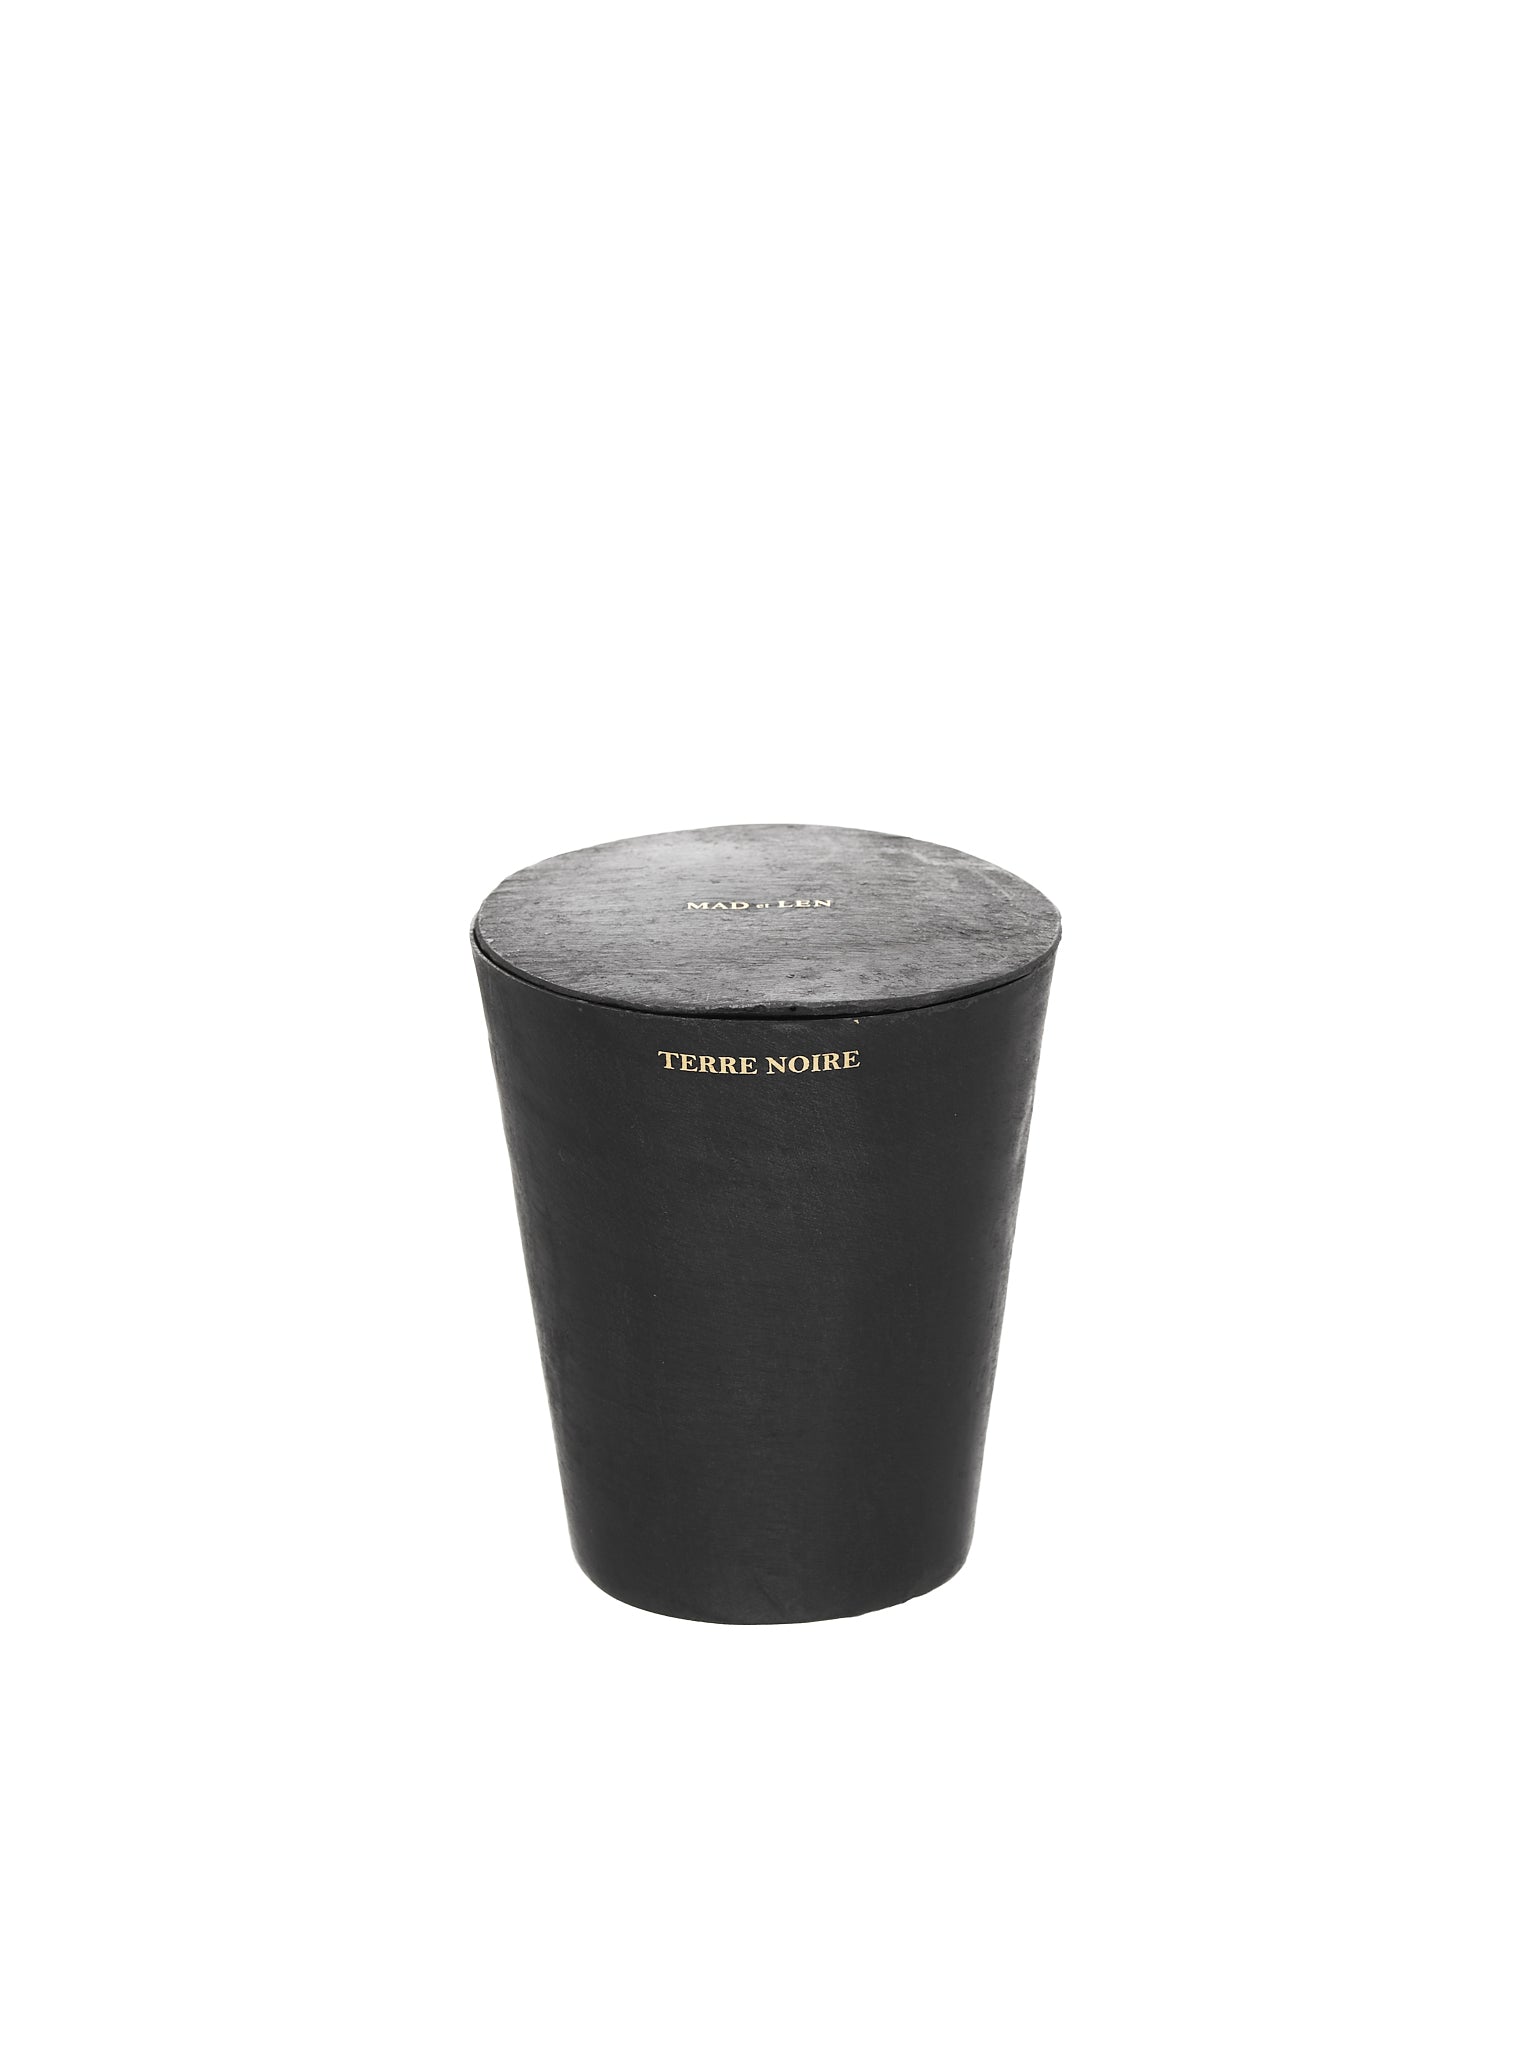 Terre Noire Candle (MAD-BVP-TN-WW-WHITE)